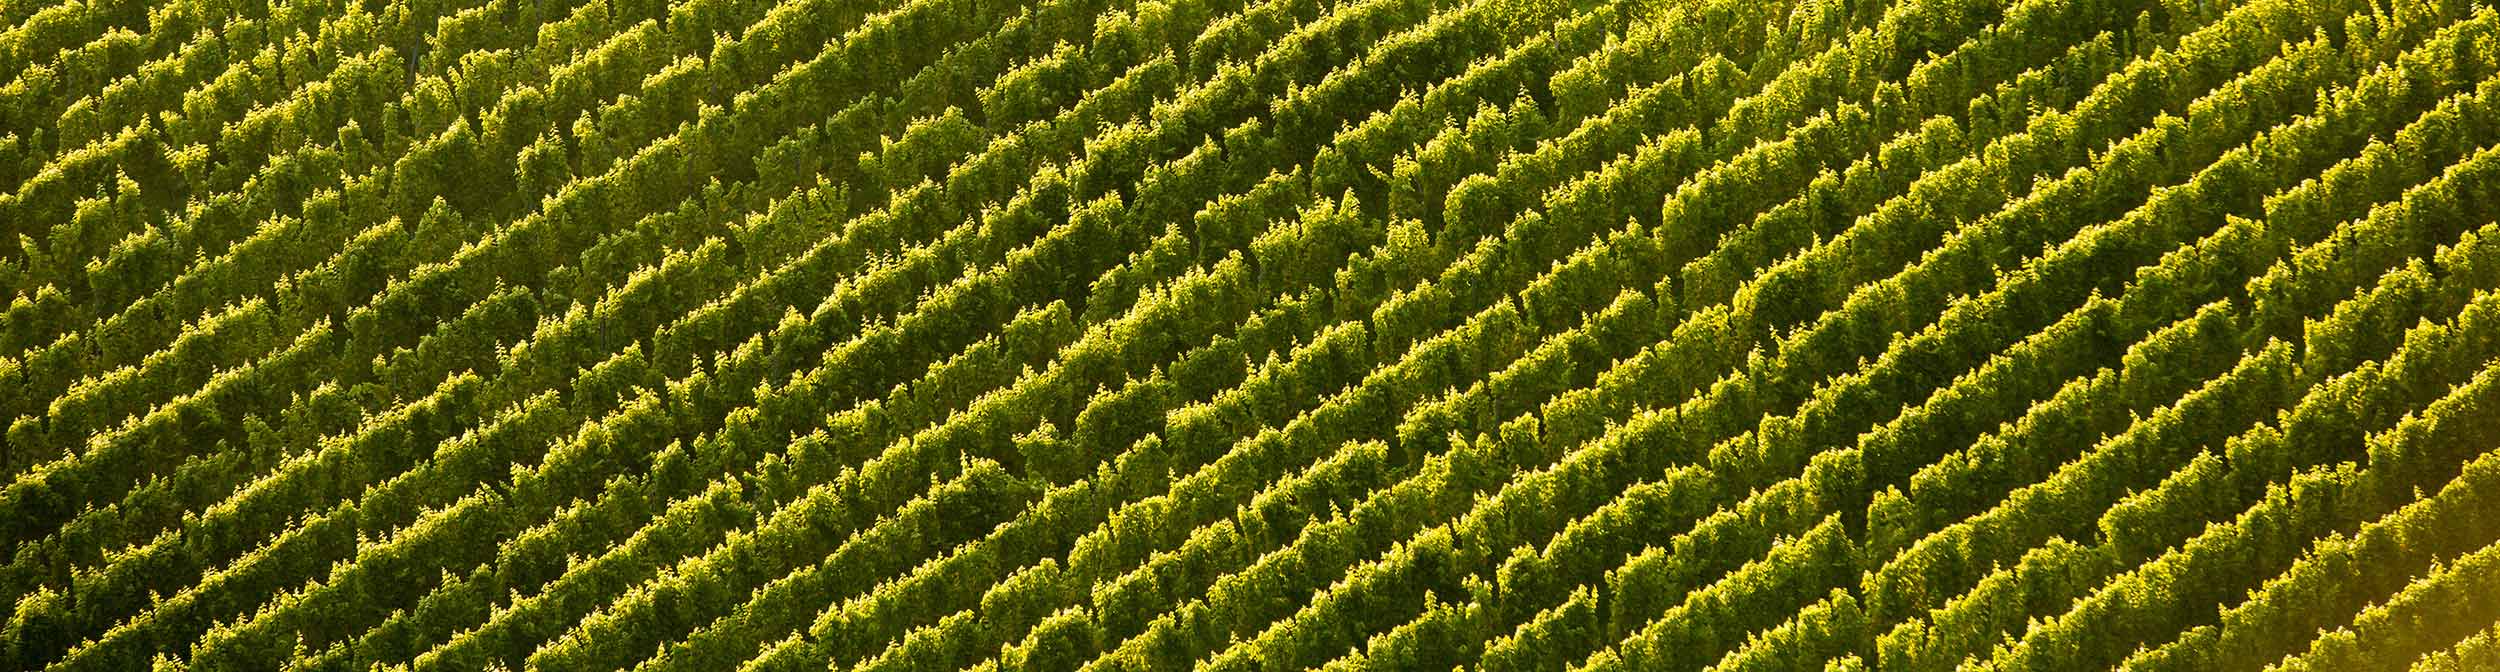 Picture of rows of grape vines